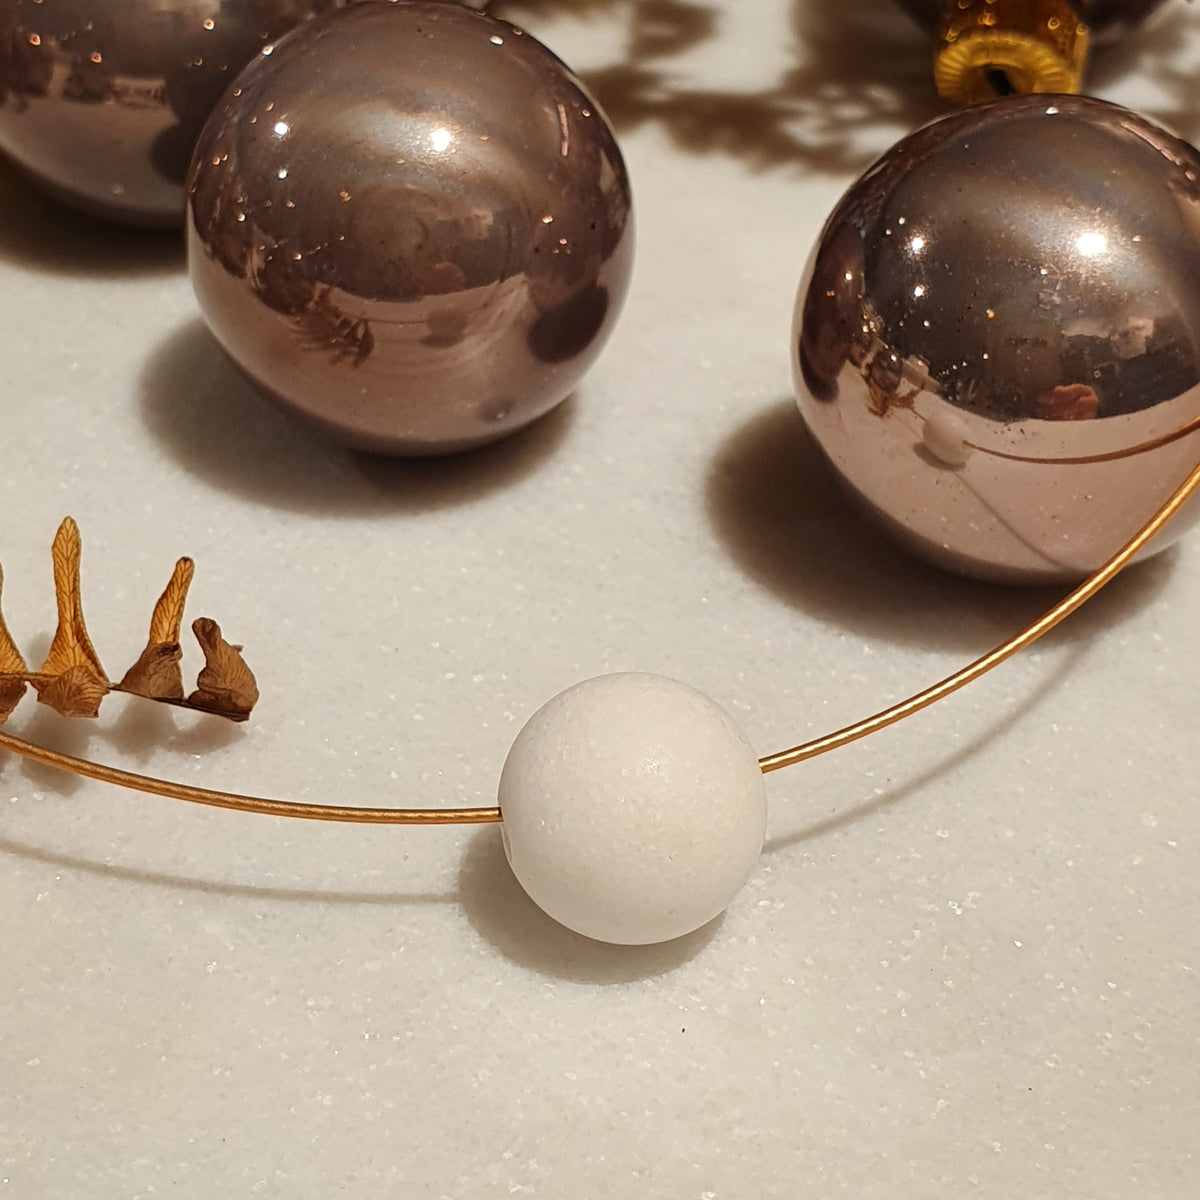 Rose necklace with marble ball